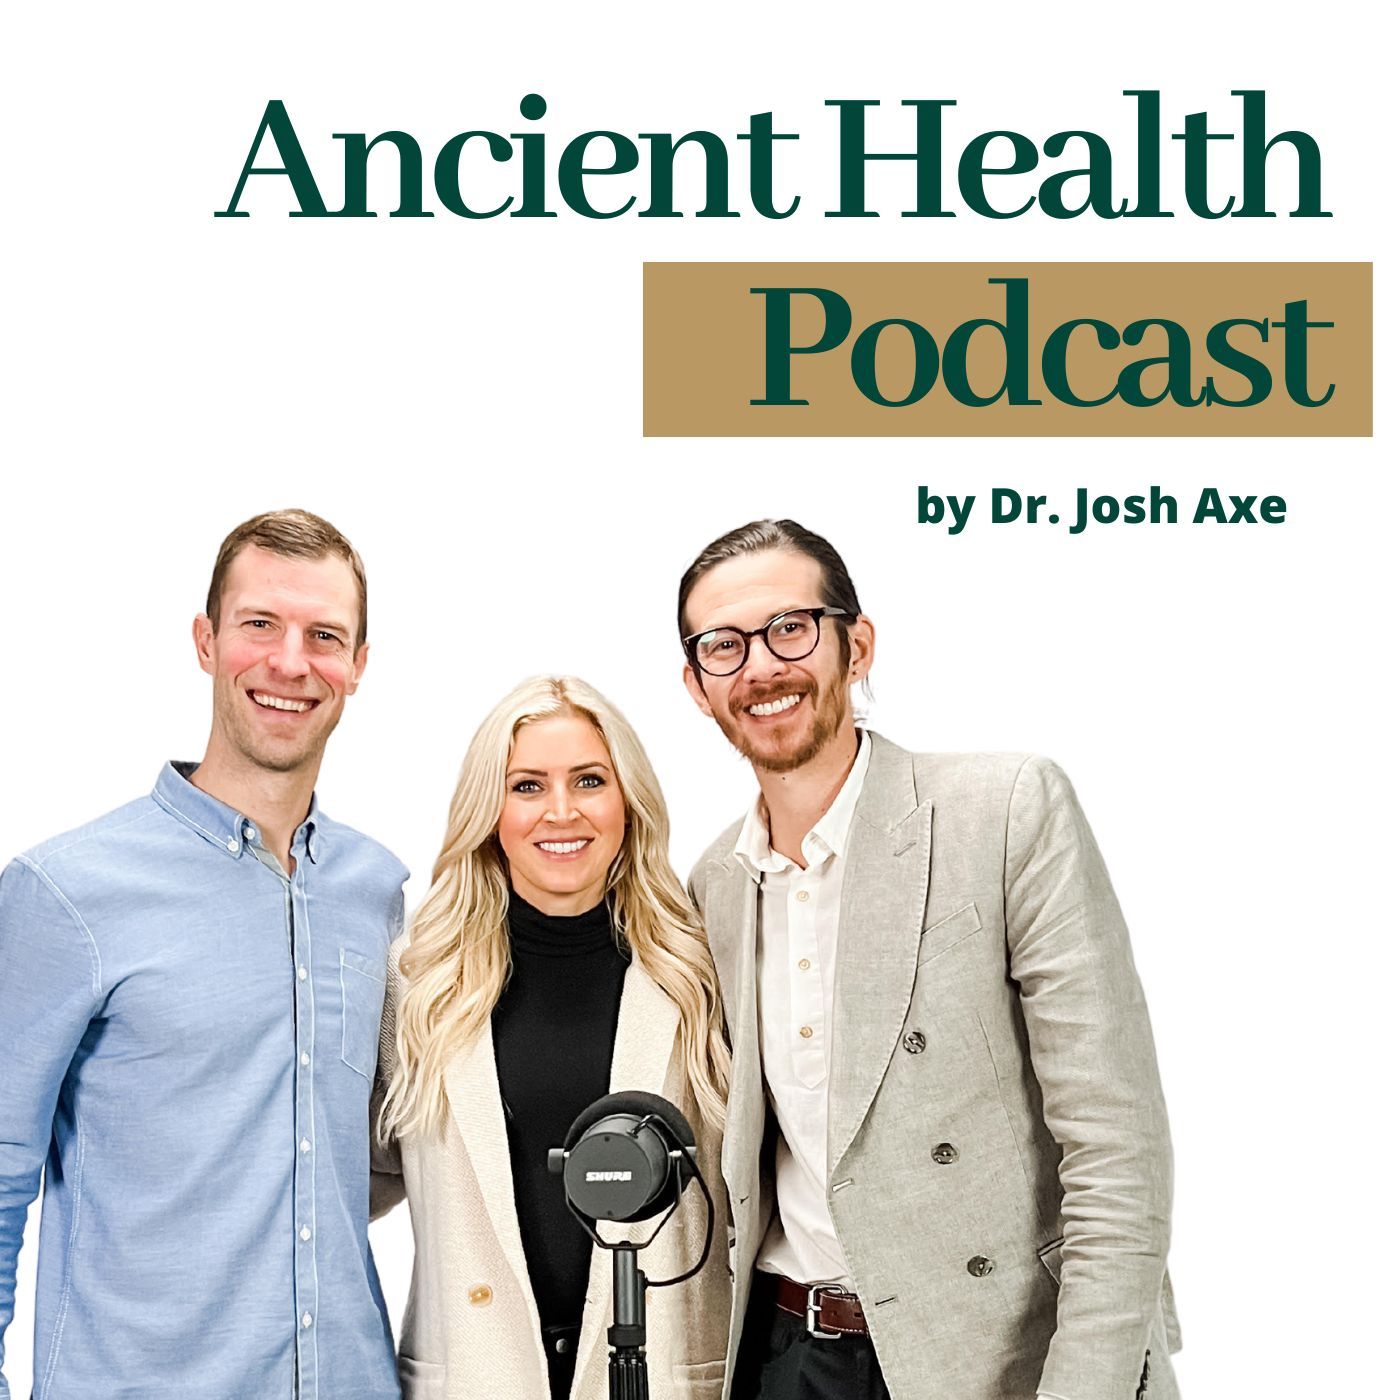 Ancient Health Podcast